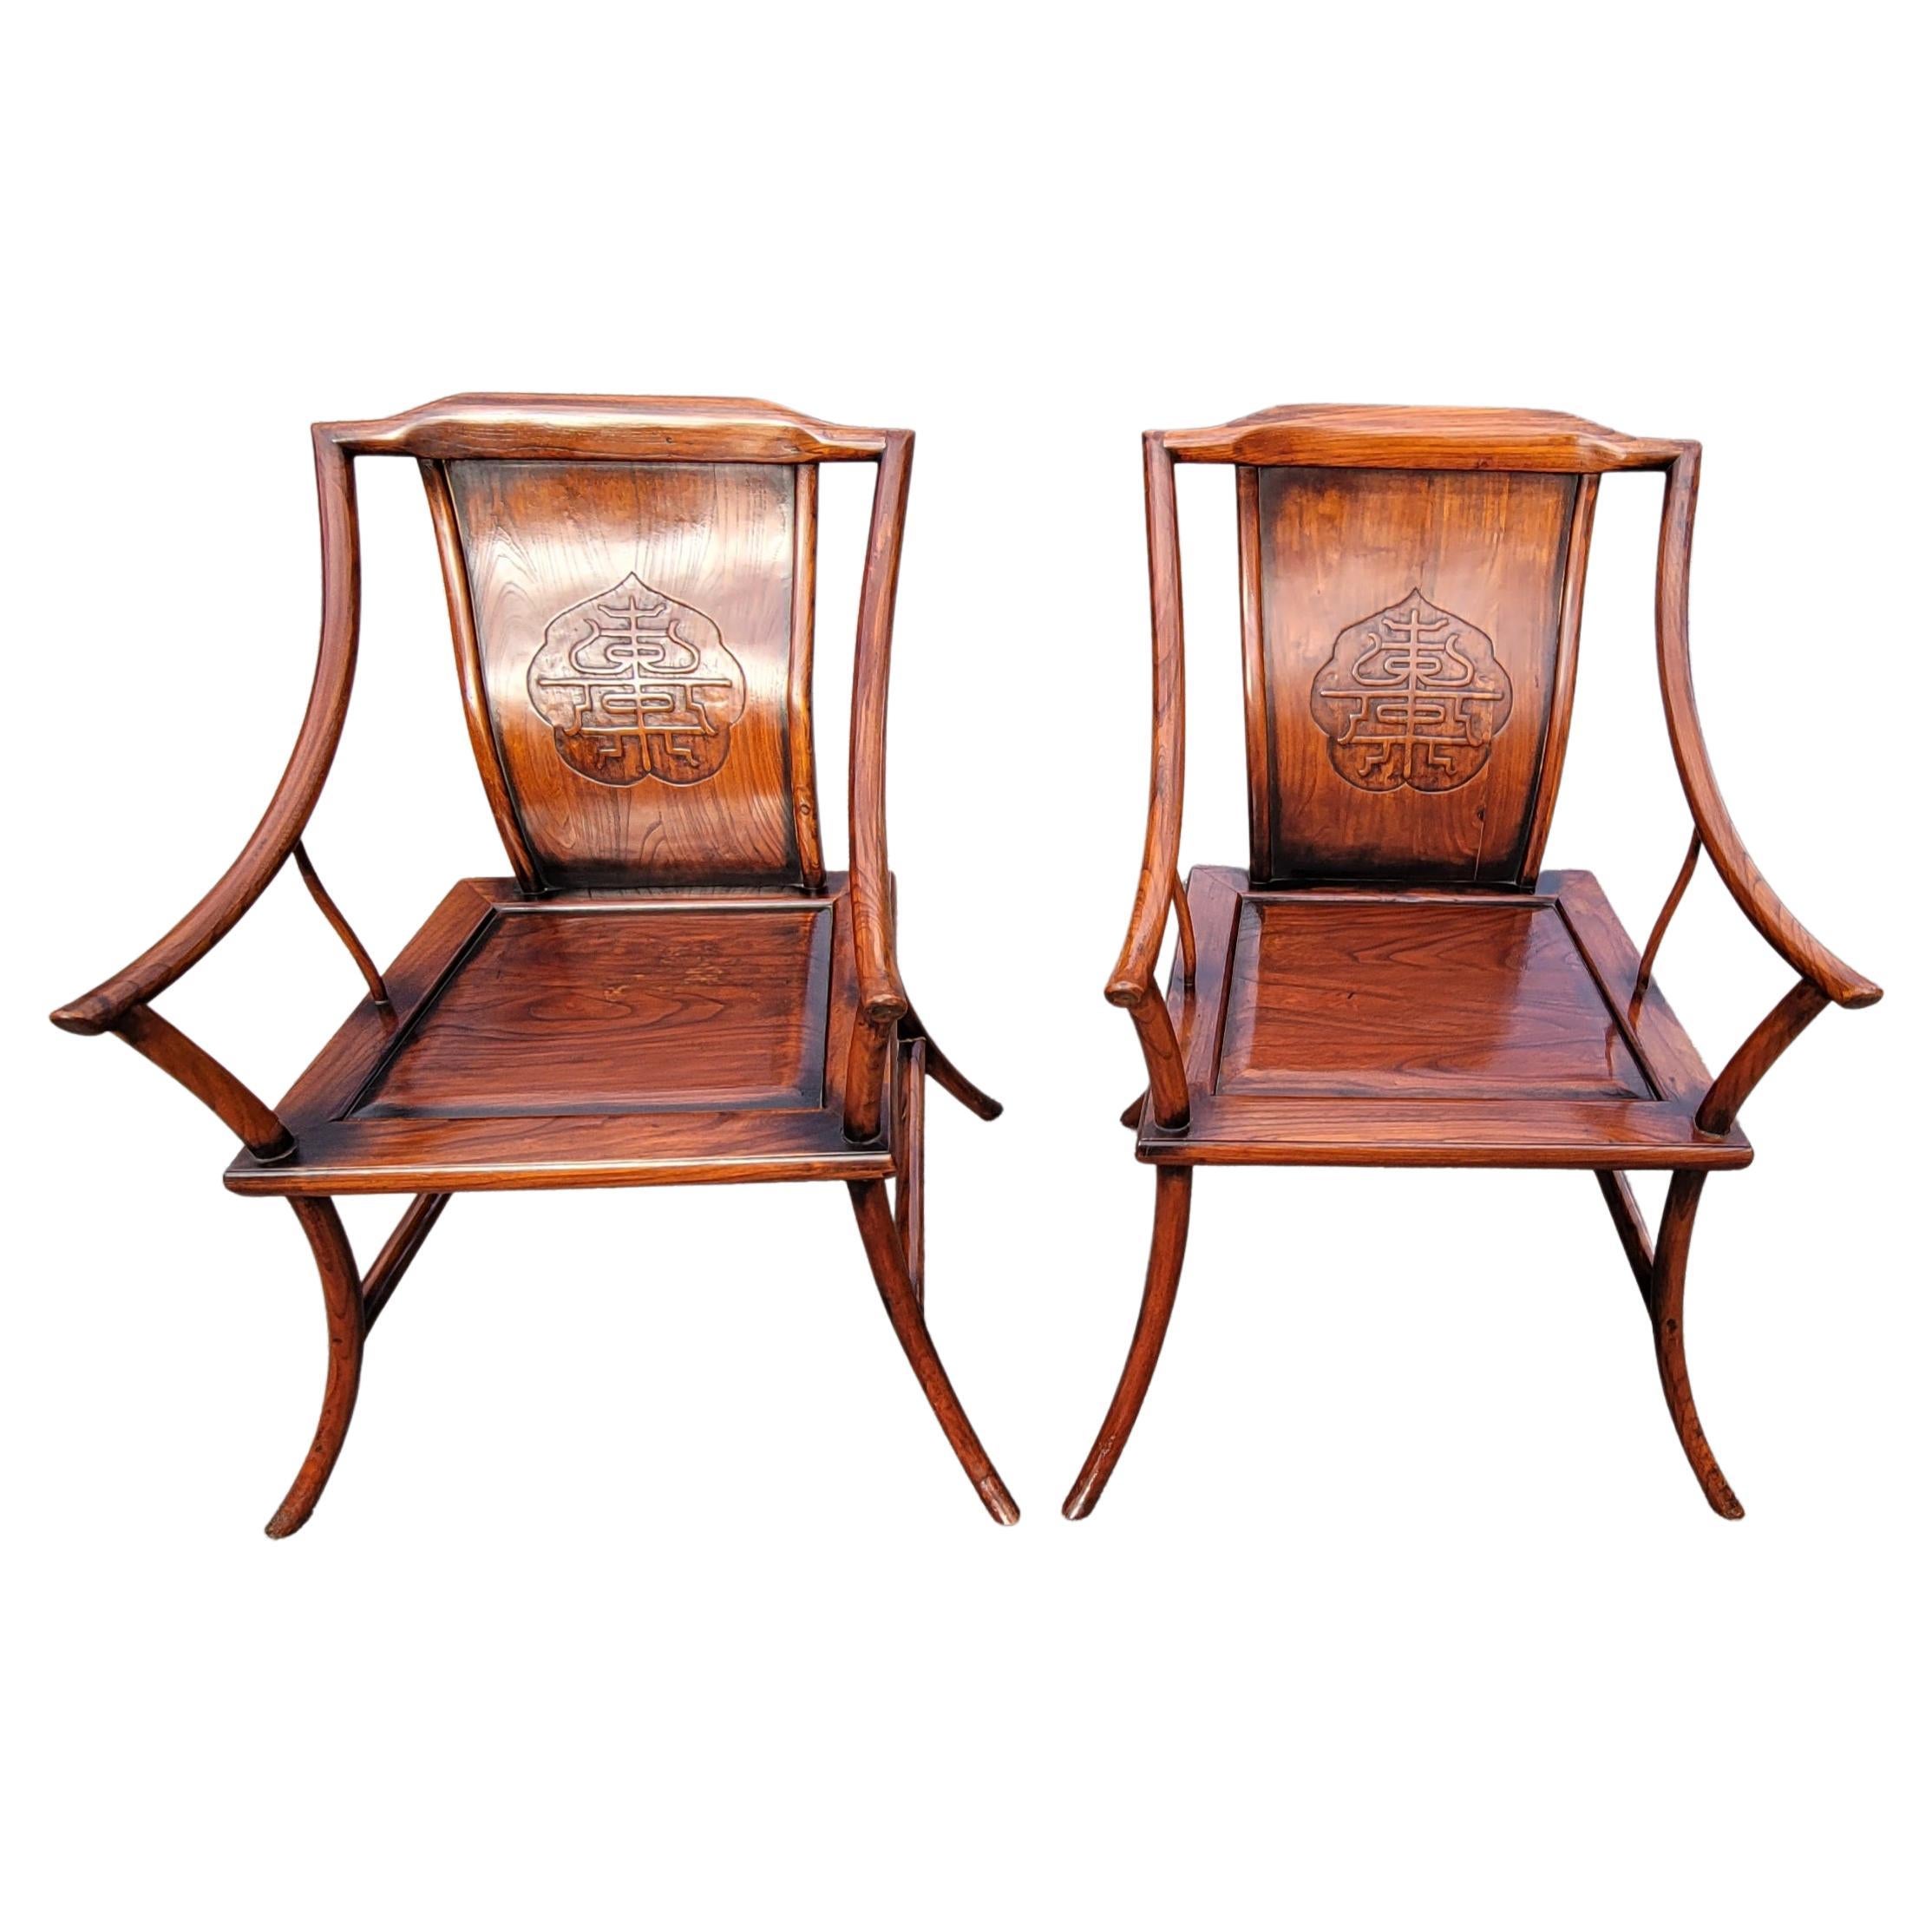 A Pair of Early 20th century Chinese elmwood armchairs with finely carved back and elongated arms and legs. 
Measure 30